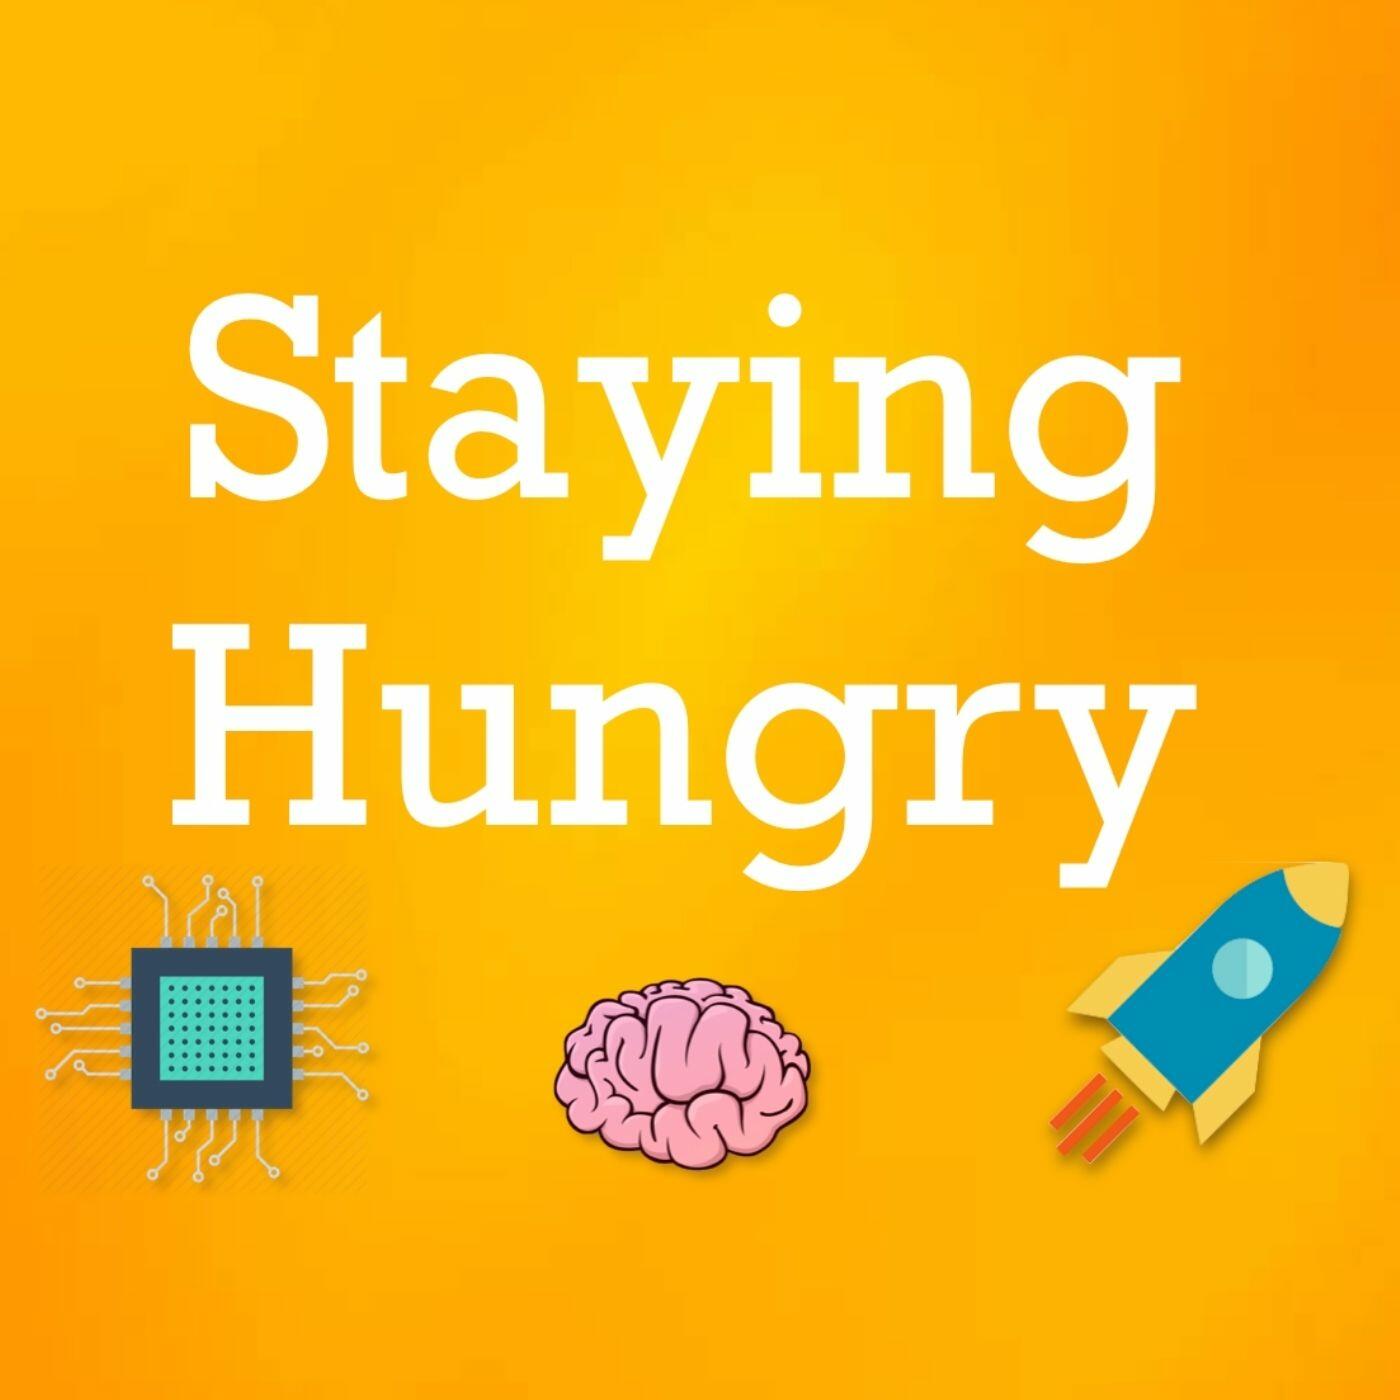 Stay hungry фестиваль. We stay Hunger. We stay hungry. Staying my life